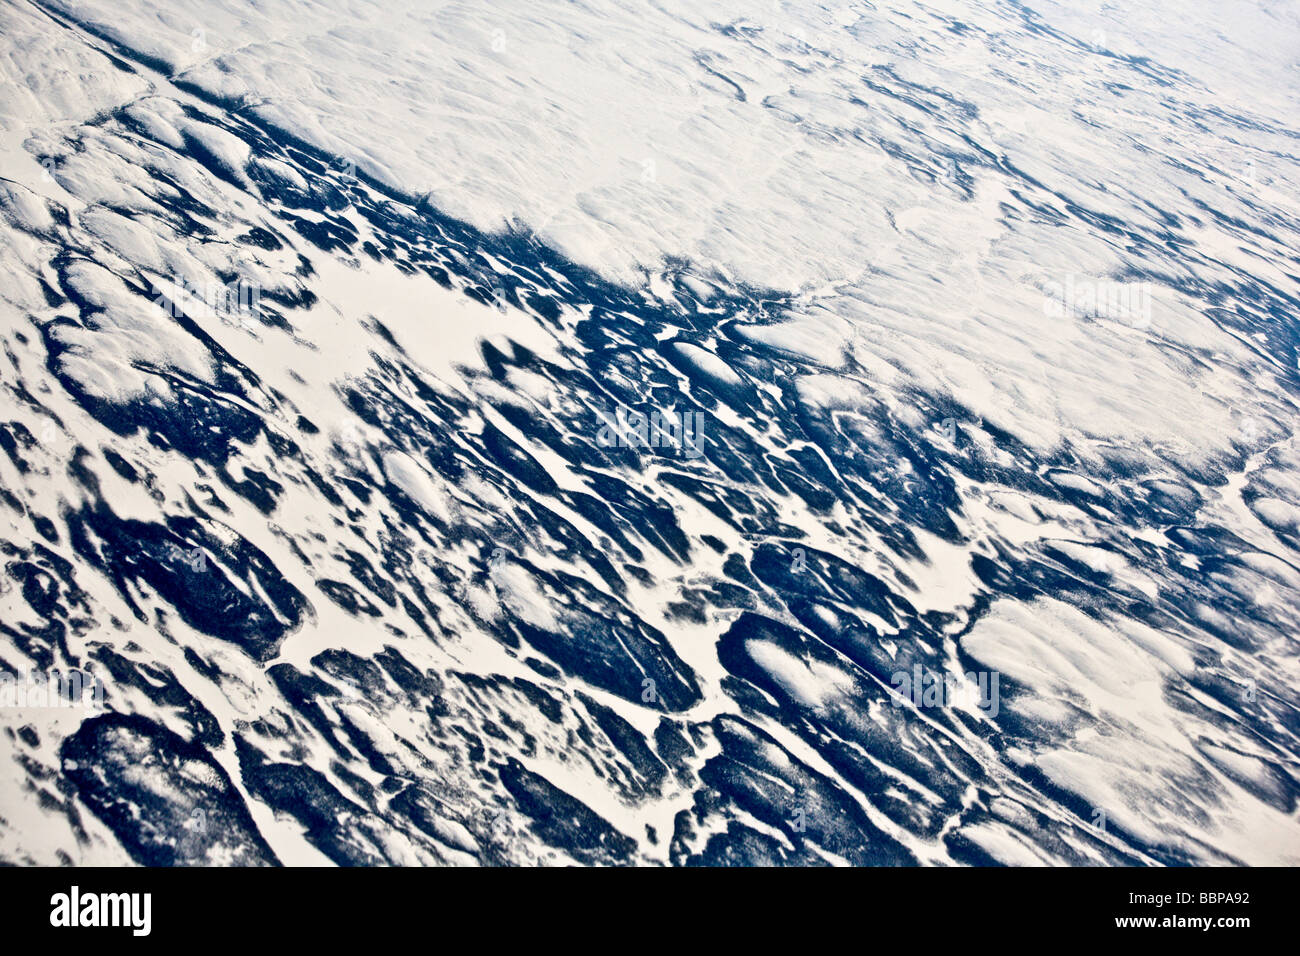 The awe-inspiring polar ice cap can be seen in this view from a plane, traveling from Frankfurt, Germany, to Washington, DC. Stock Photo